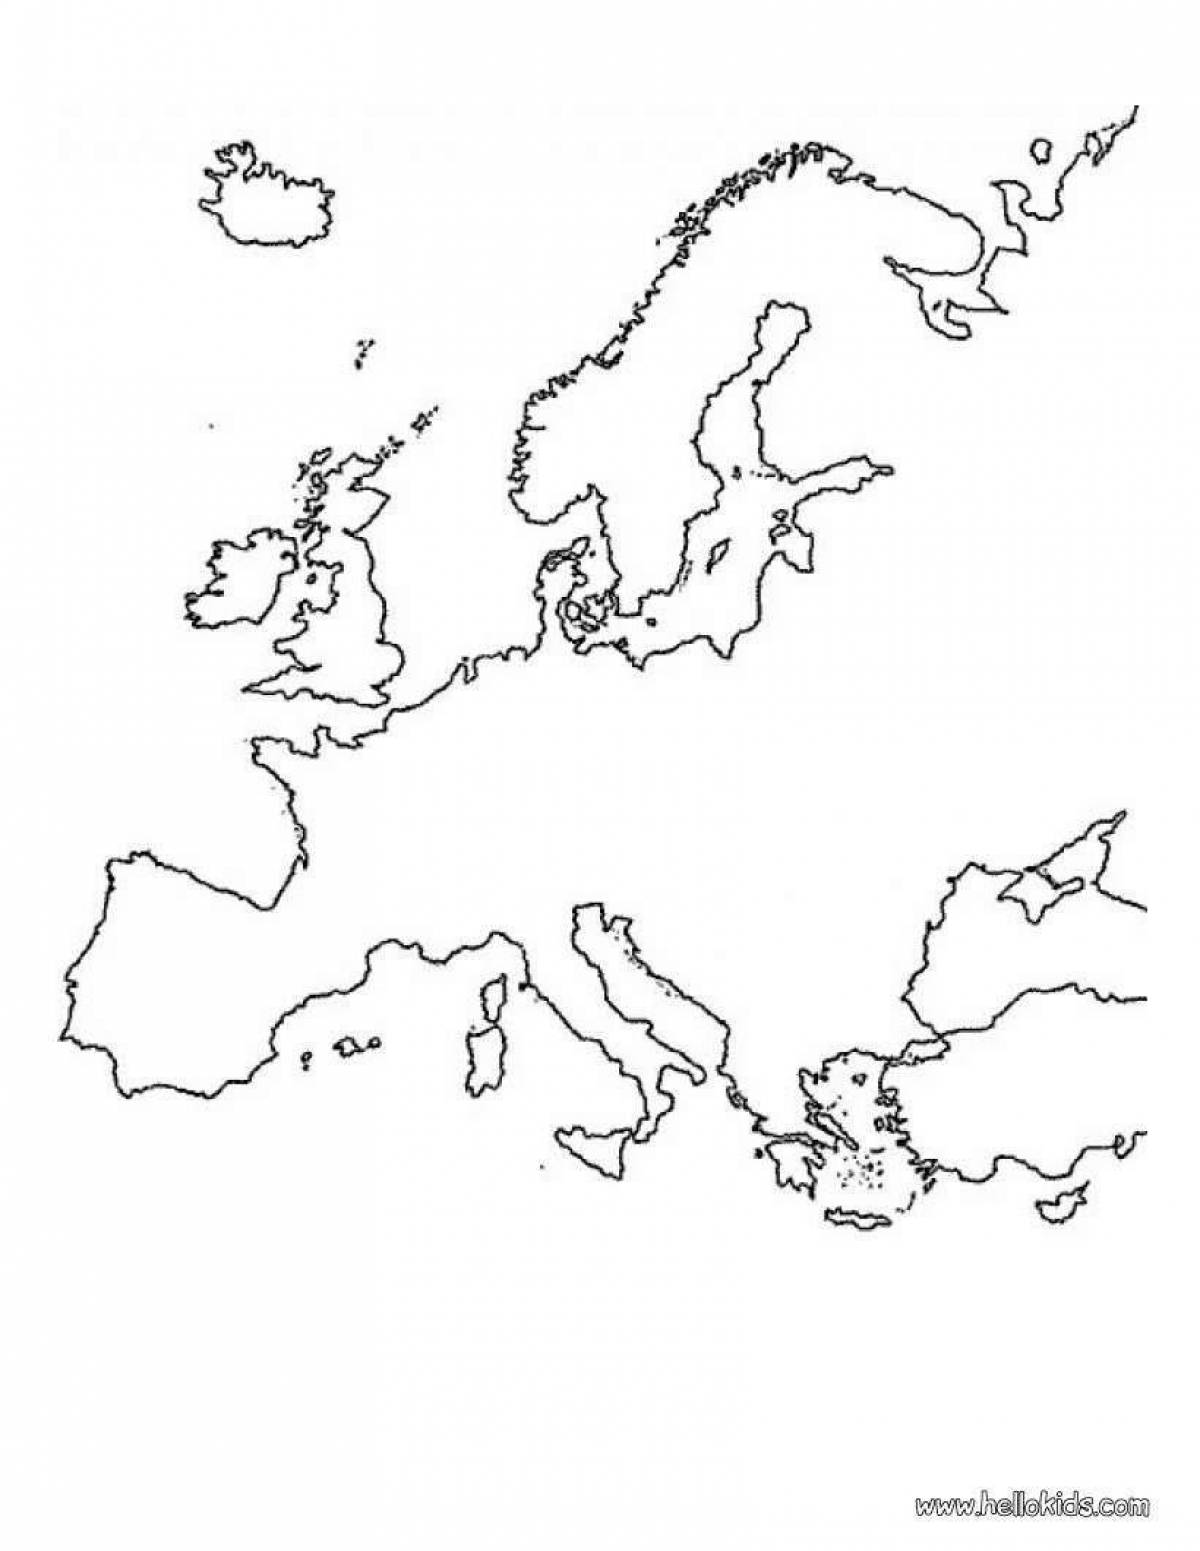 Exotic map of europe with countries